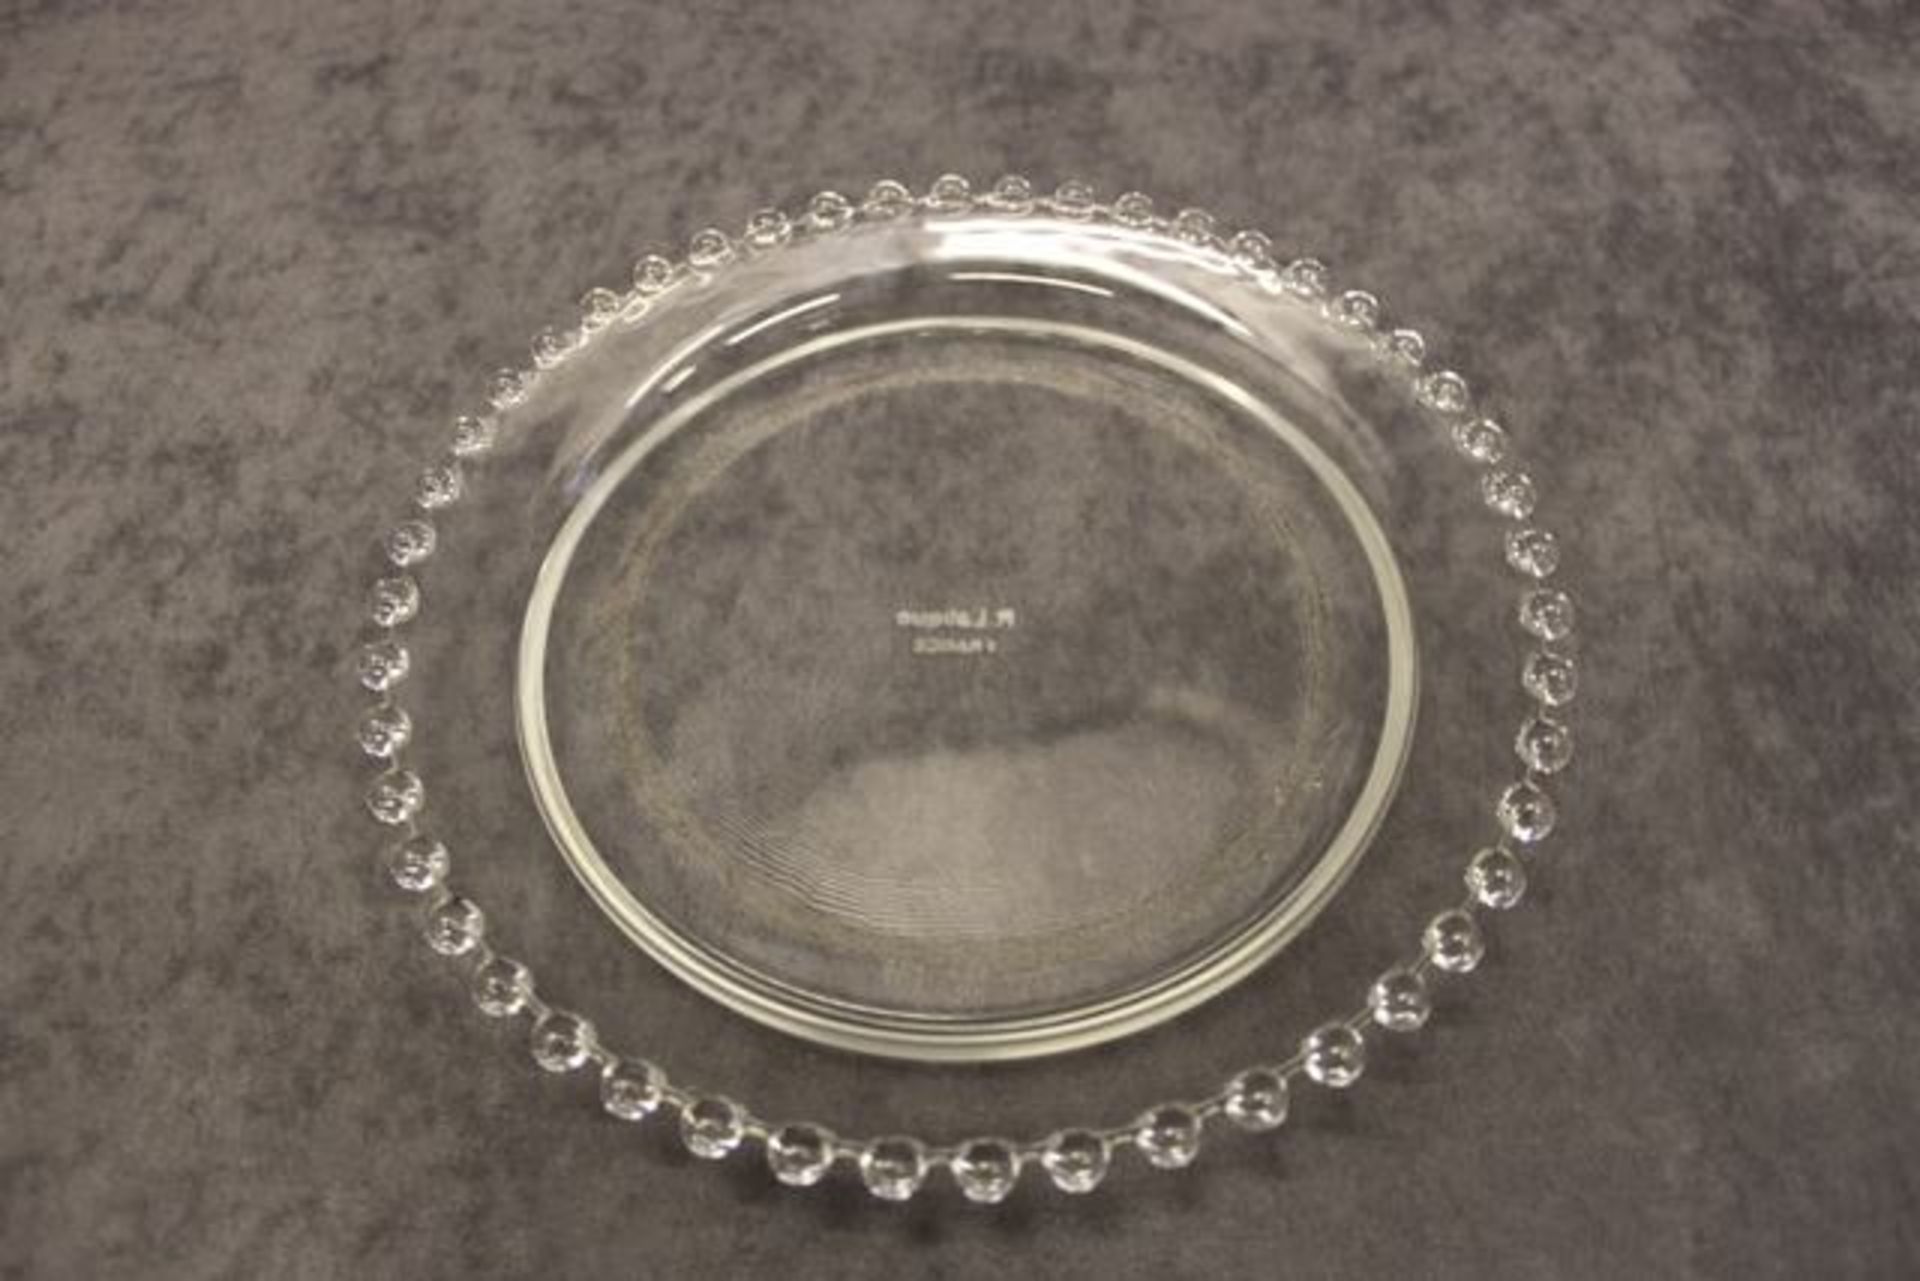 R Lalique France (1860-1945) “Andlau” plate, opaque glass moulded pearl style forms all around the - Image 2 of 2